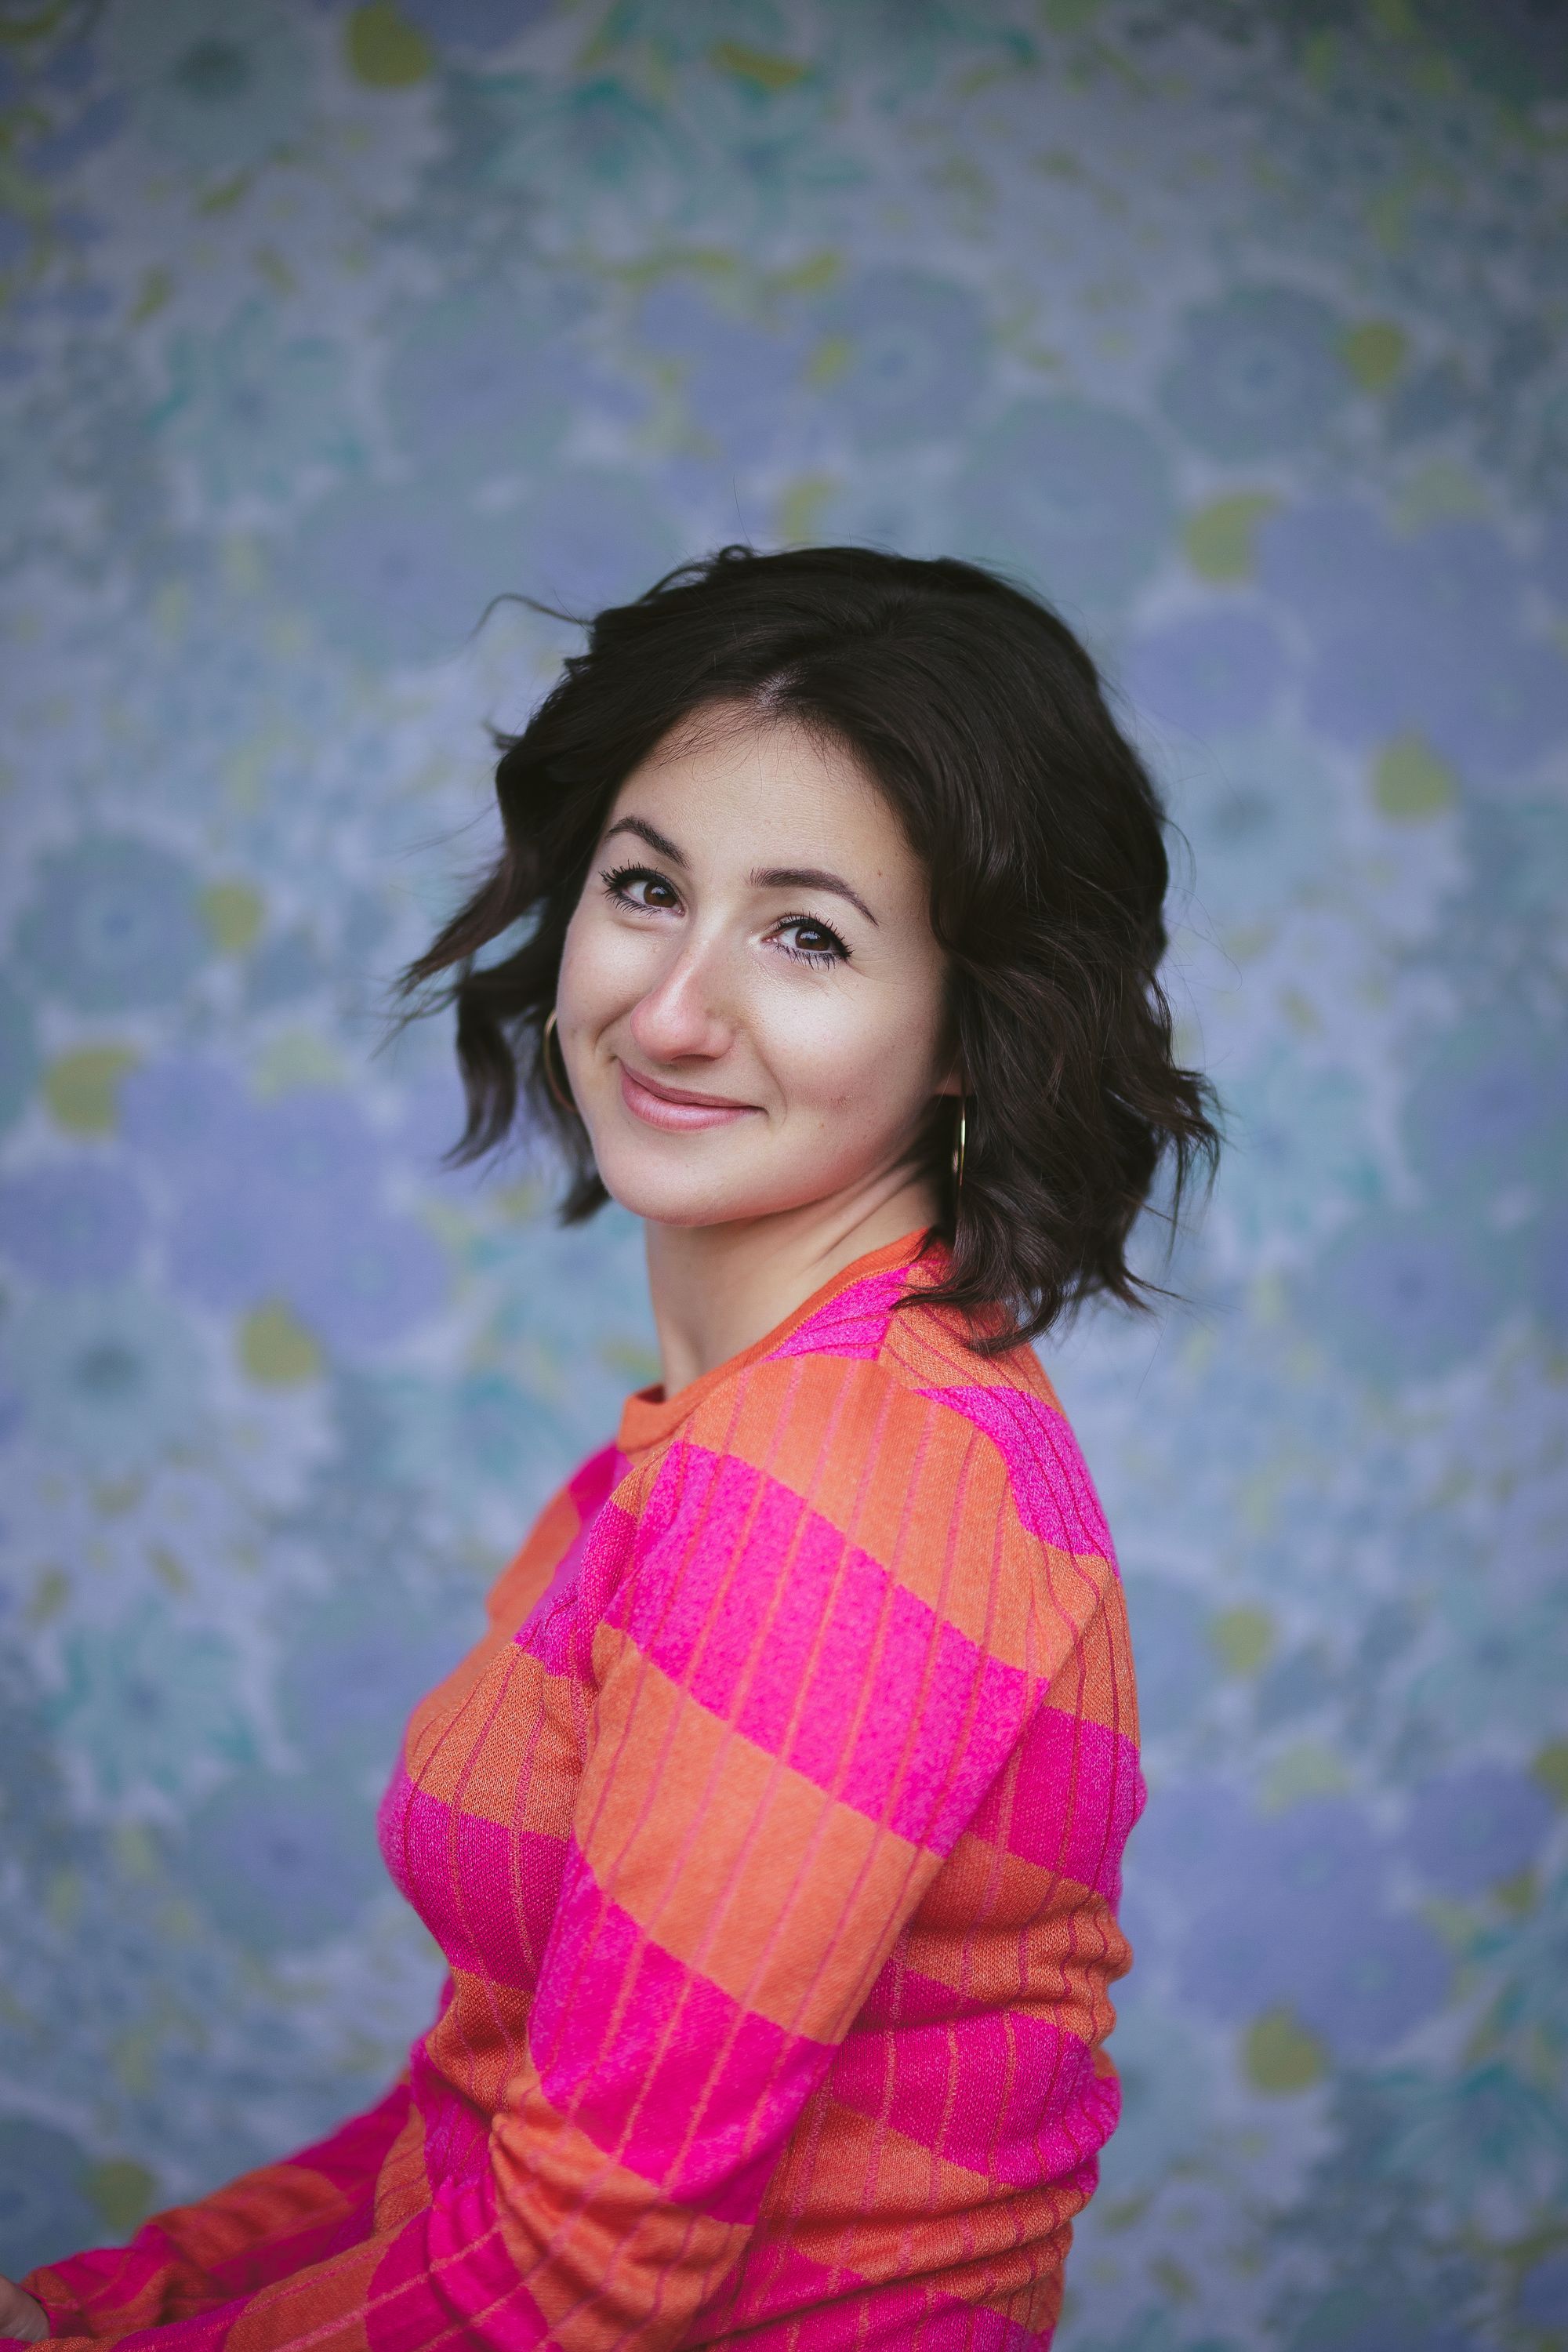 A portrait photograph of me sitting, smiling at the photographer, wearing a pink and orange striped top